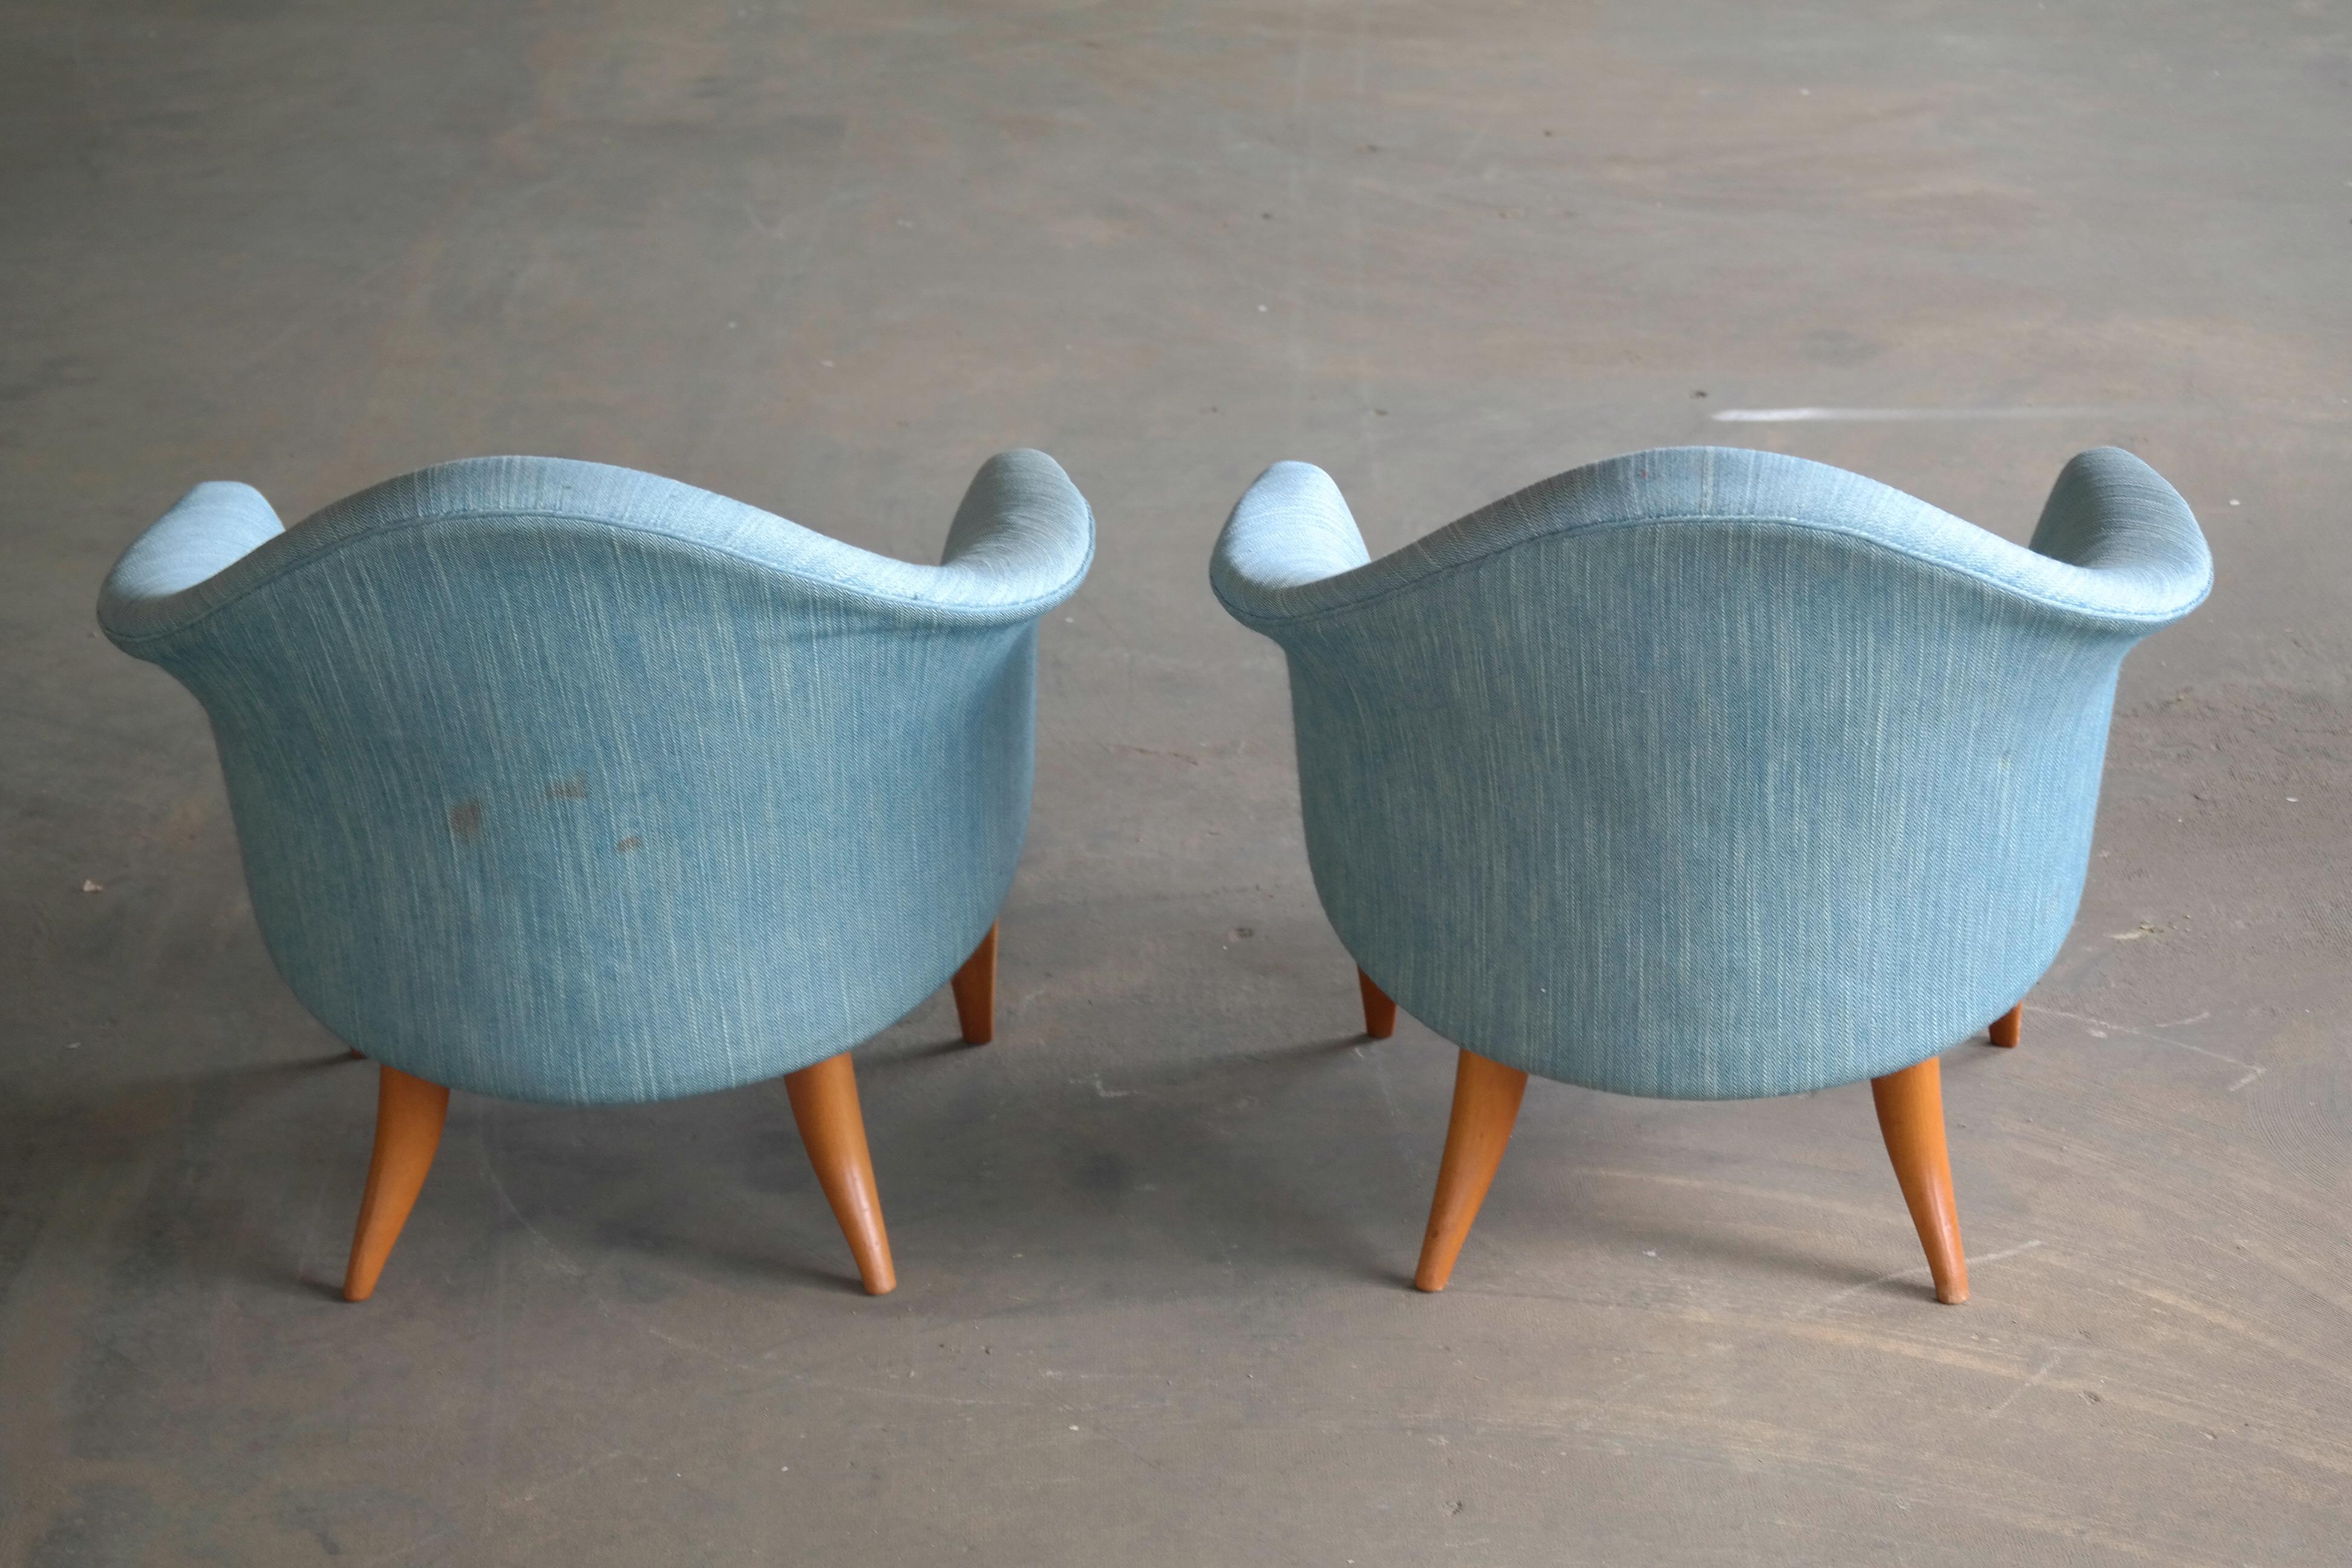 Fantastic pair of lounge chairs designed Model Little Adam by leading Swedish midcentury-era designer, Kerstin Horlin Holmquist. The chairs were part of a design-series named 